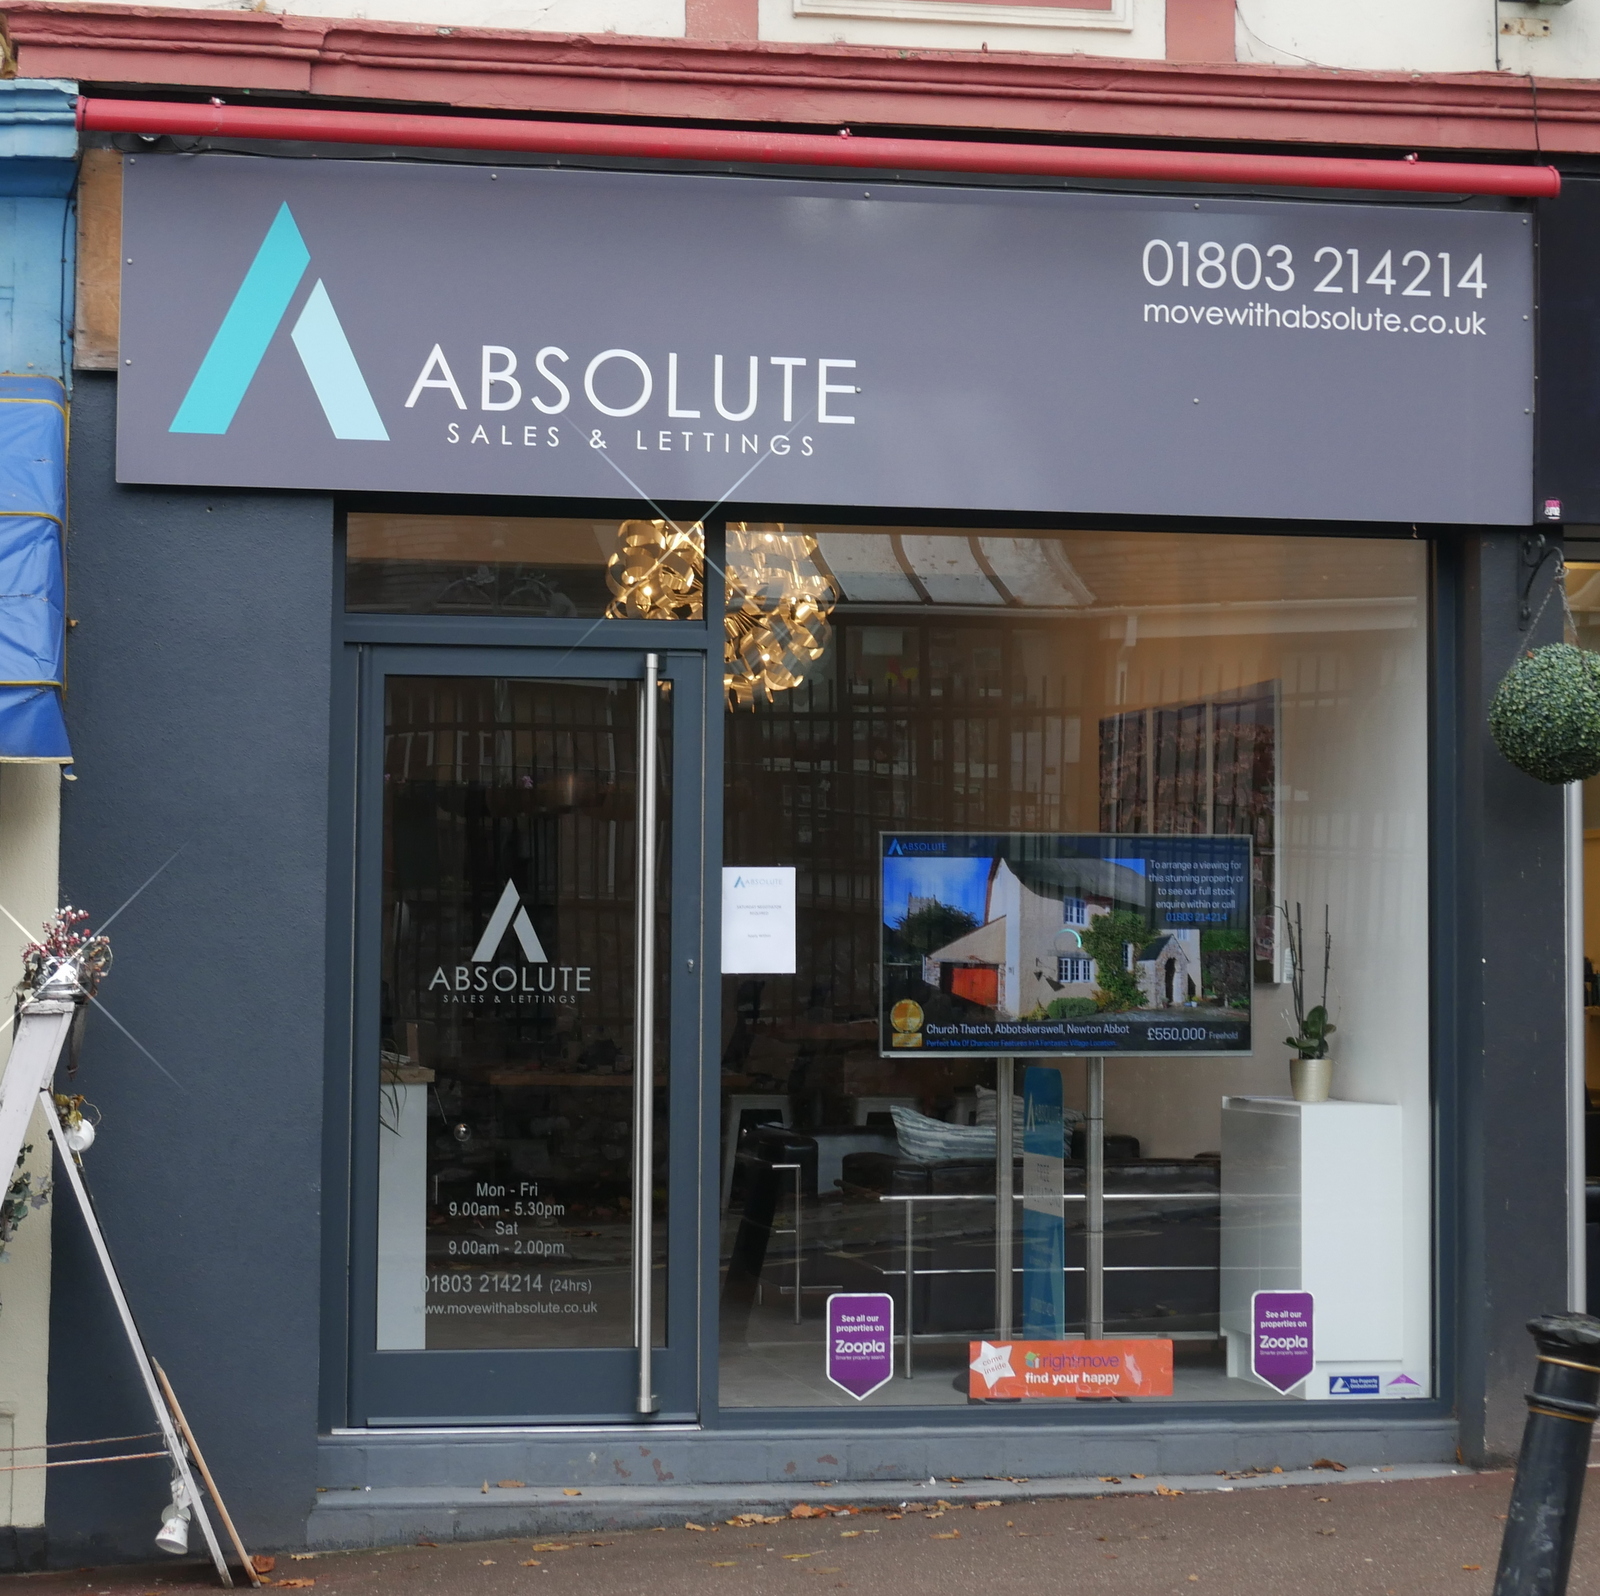 Absolute Sales and Lettings in Wellswood, Torquay